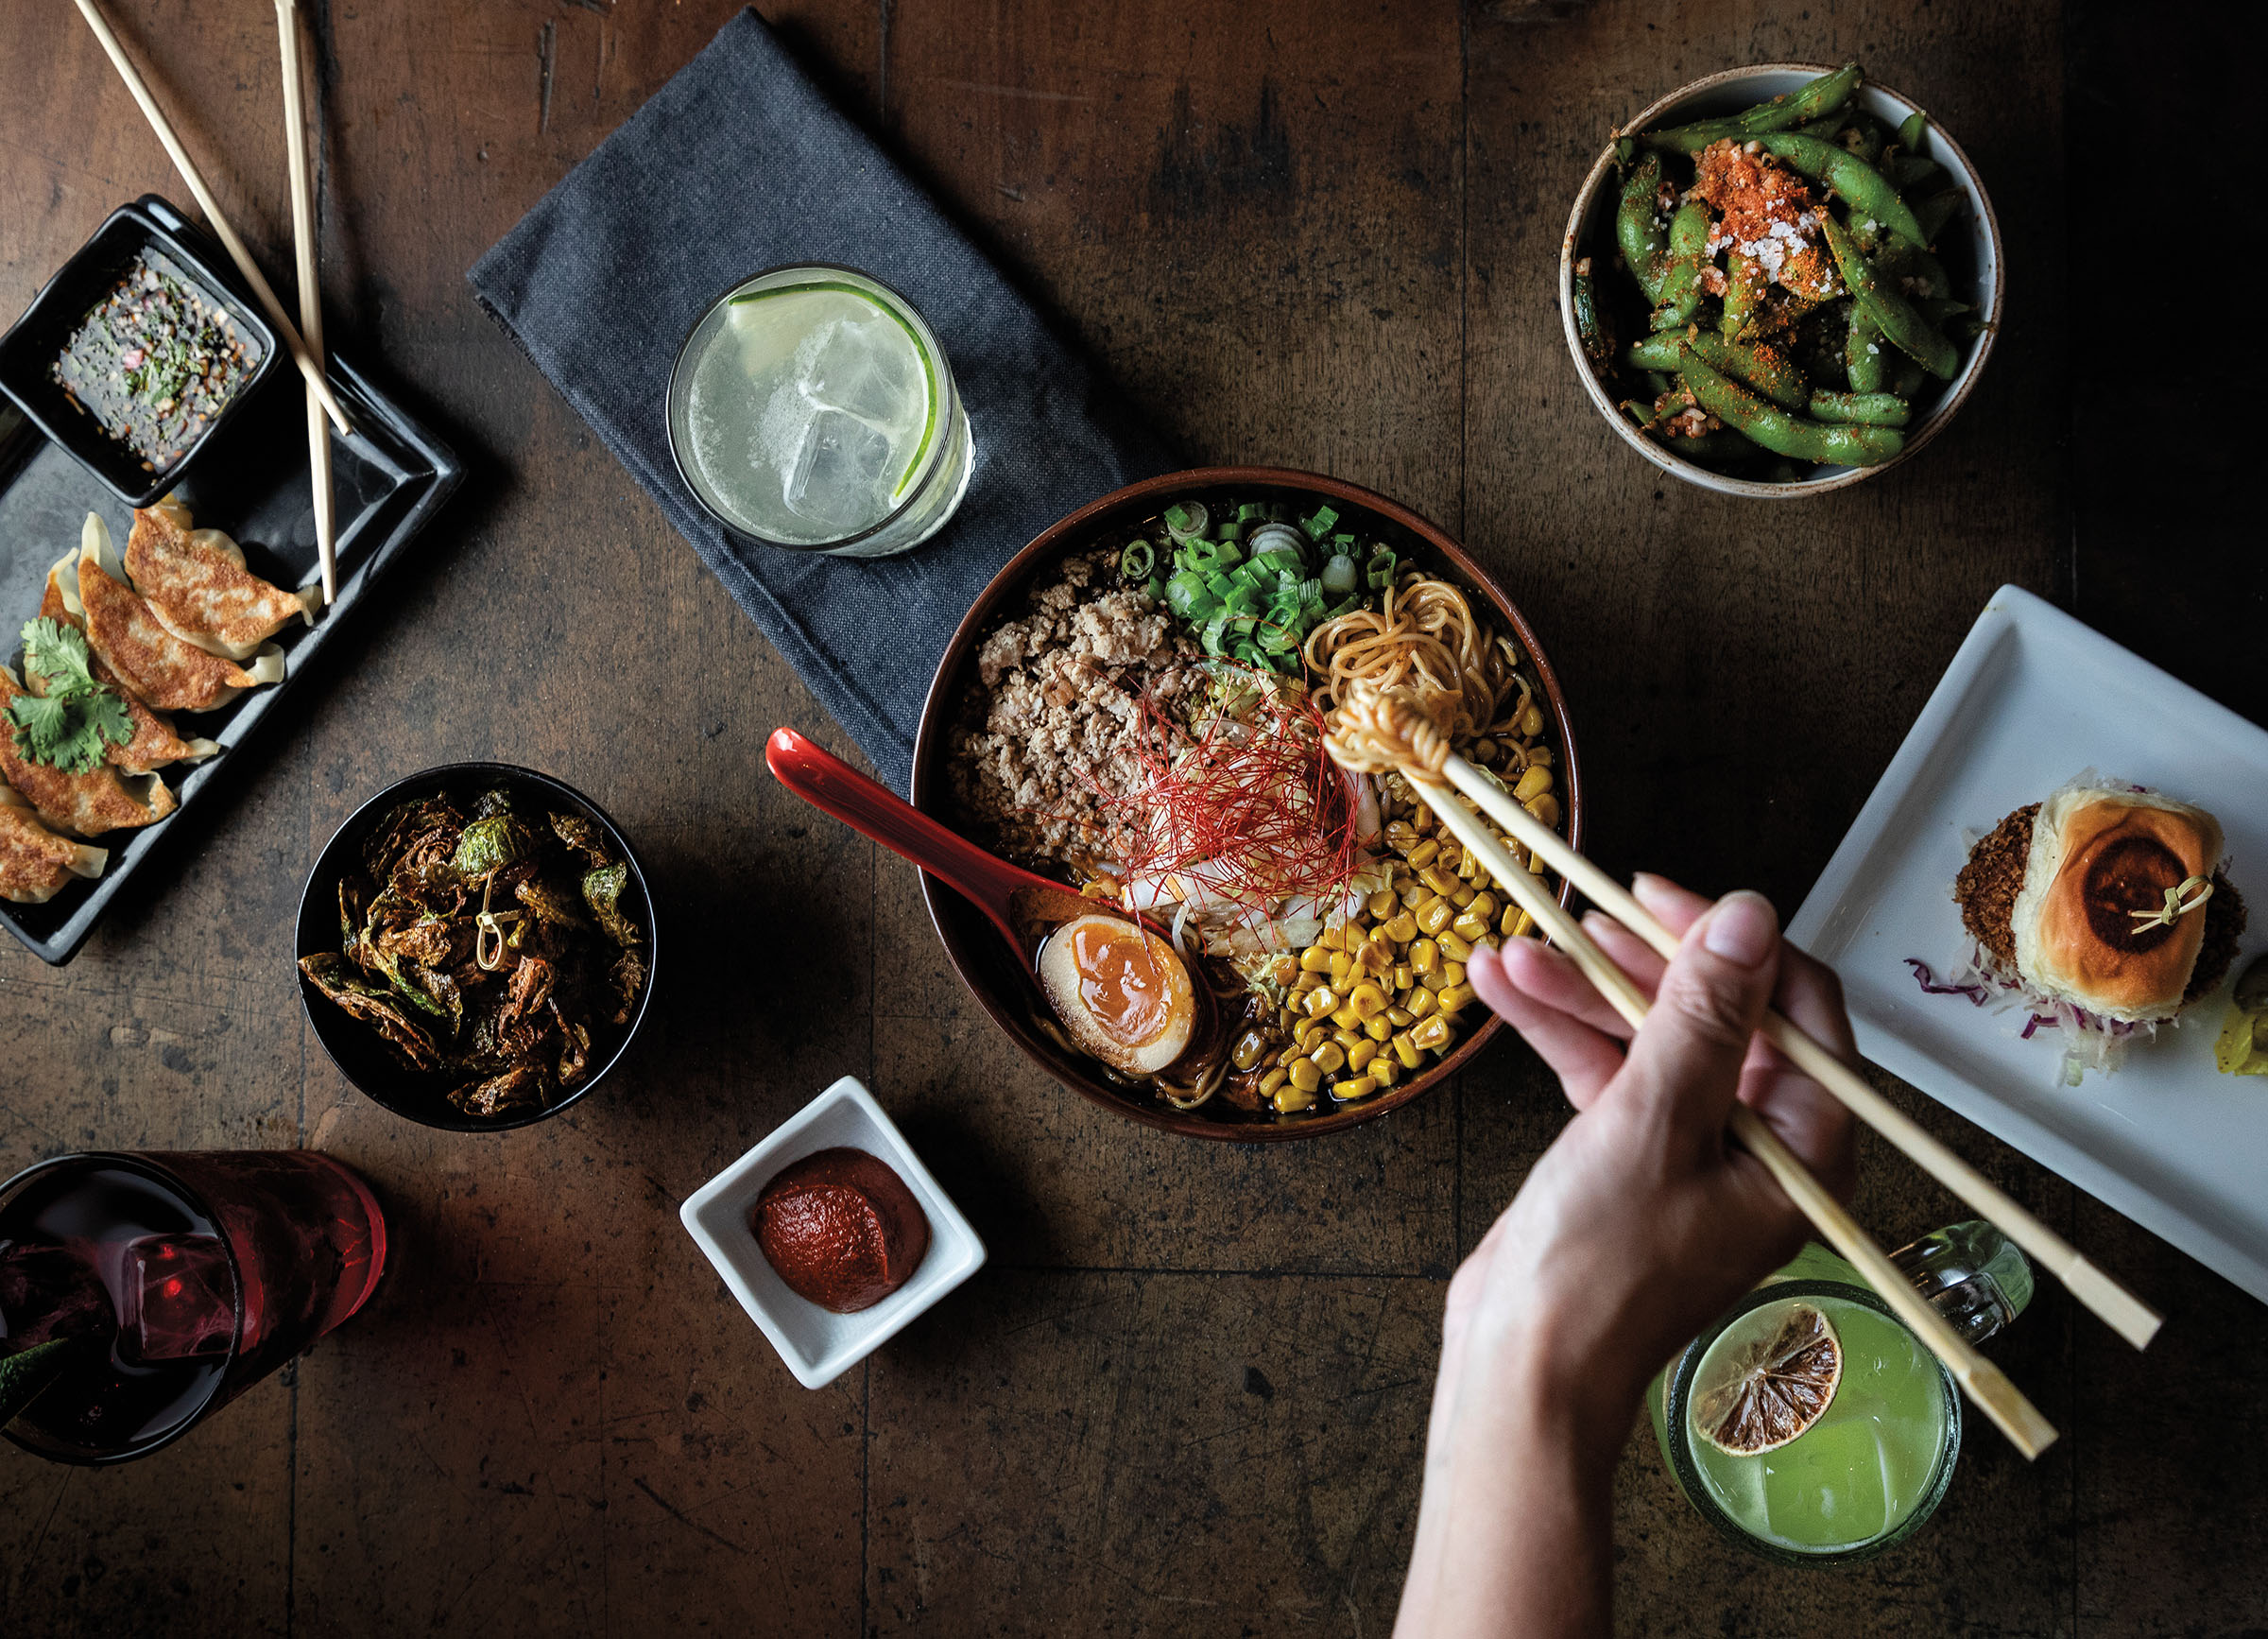 An overhead view of chopsticks dipping into a bowl of ramen, surrounded by various toppings and sides on a dark wood background